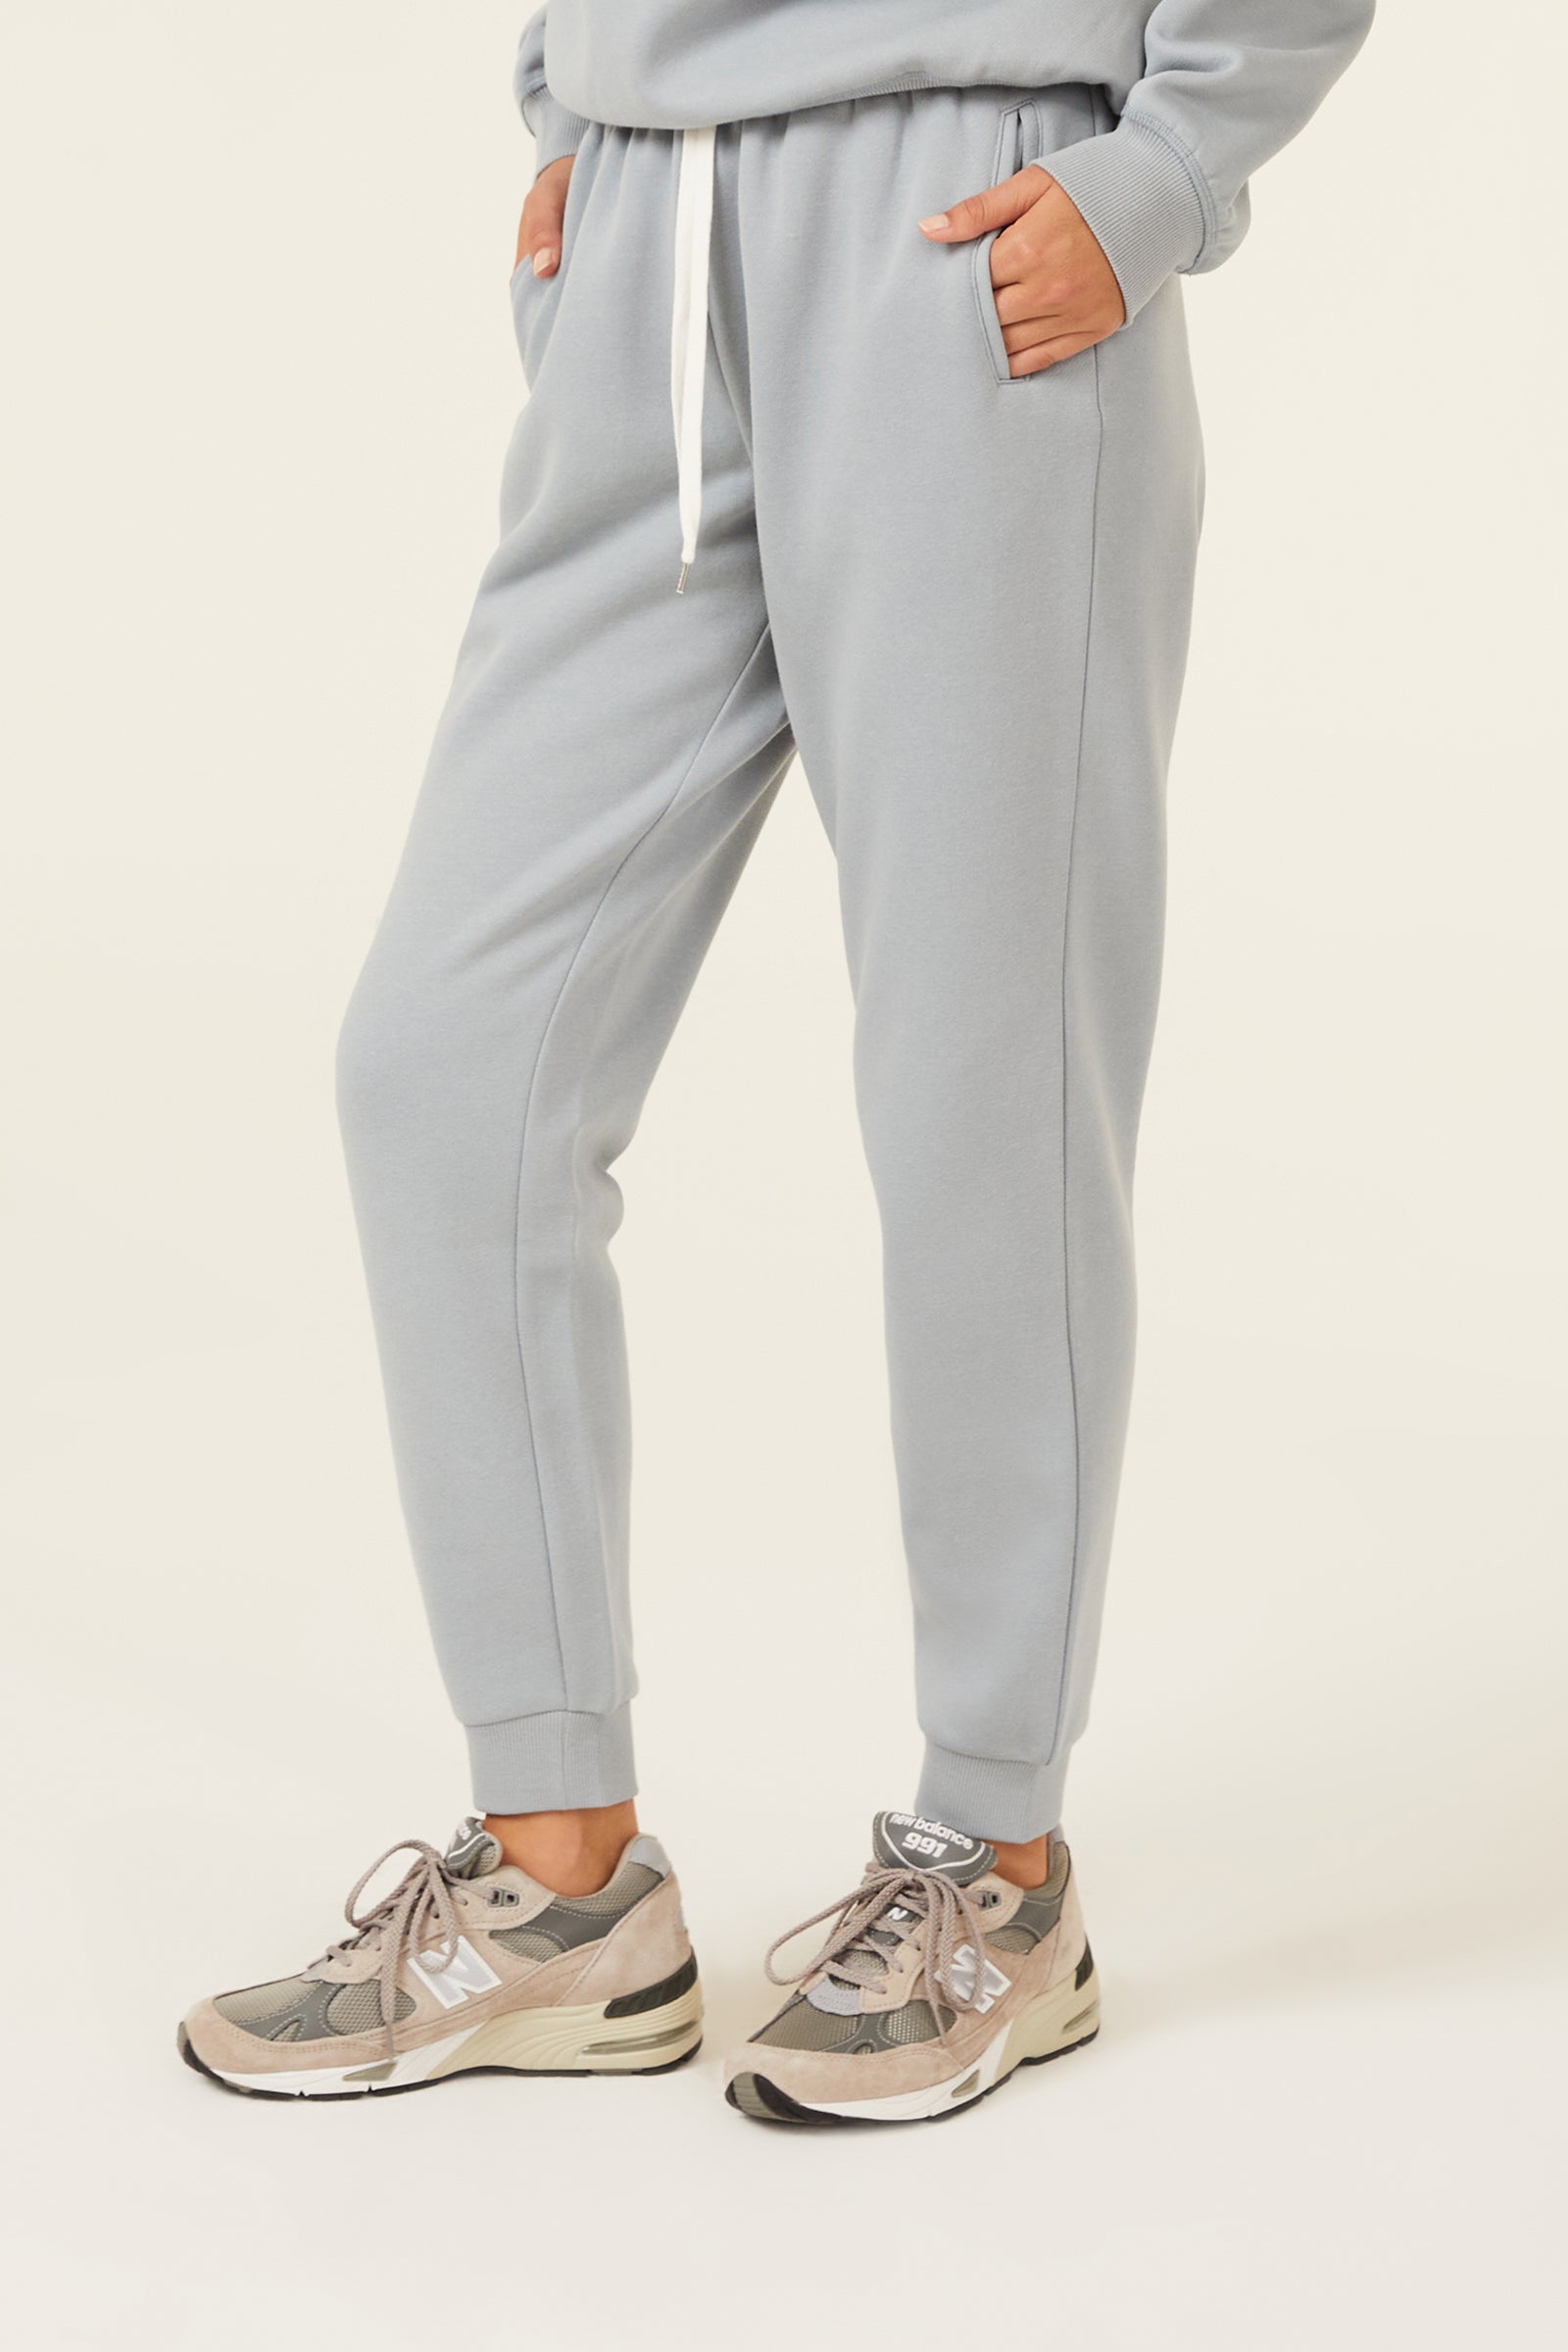 Nude Lucy Carter Classic Trackpant In a Green & Blue Toned Marine Colour